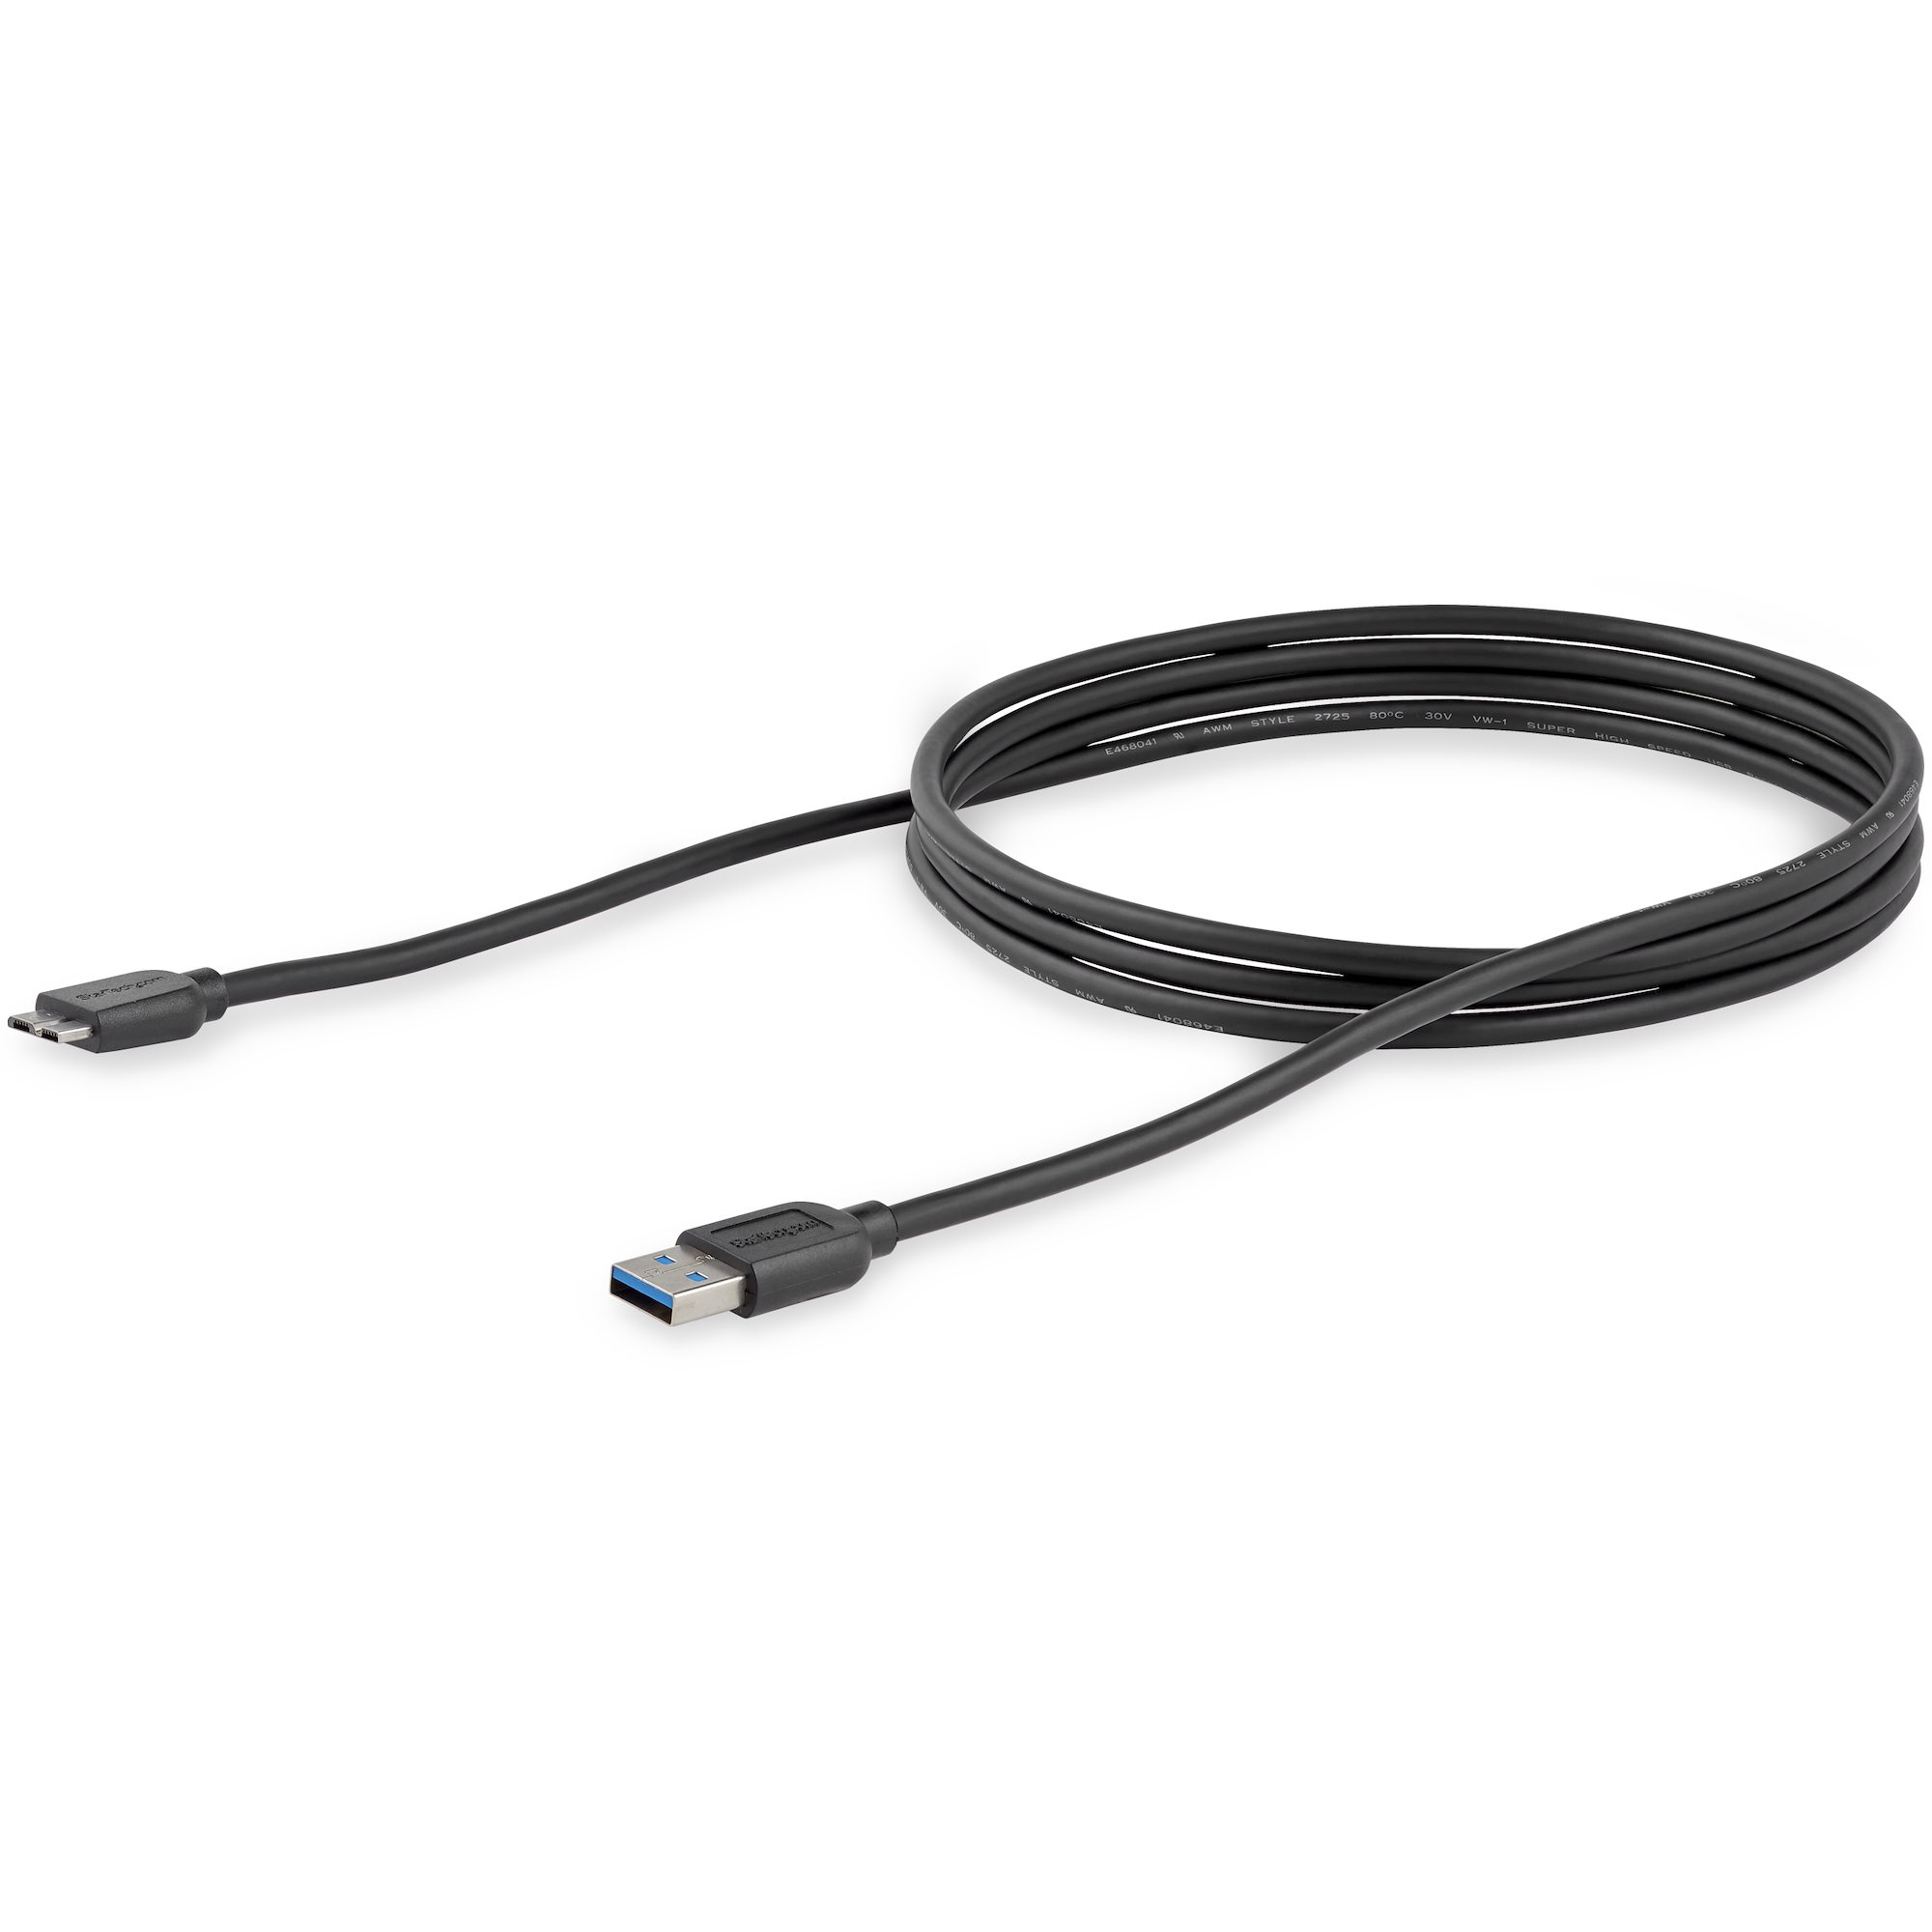 StarTech.com 2m Micro USB Cable Cord, Black (USBAUB2MD) - Buy StarTech.com  2m Micro USB Cable Cord, Black (USBAUB2MD) Online at Low Price in India -  .in